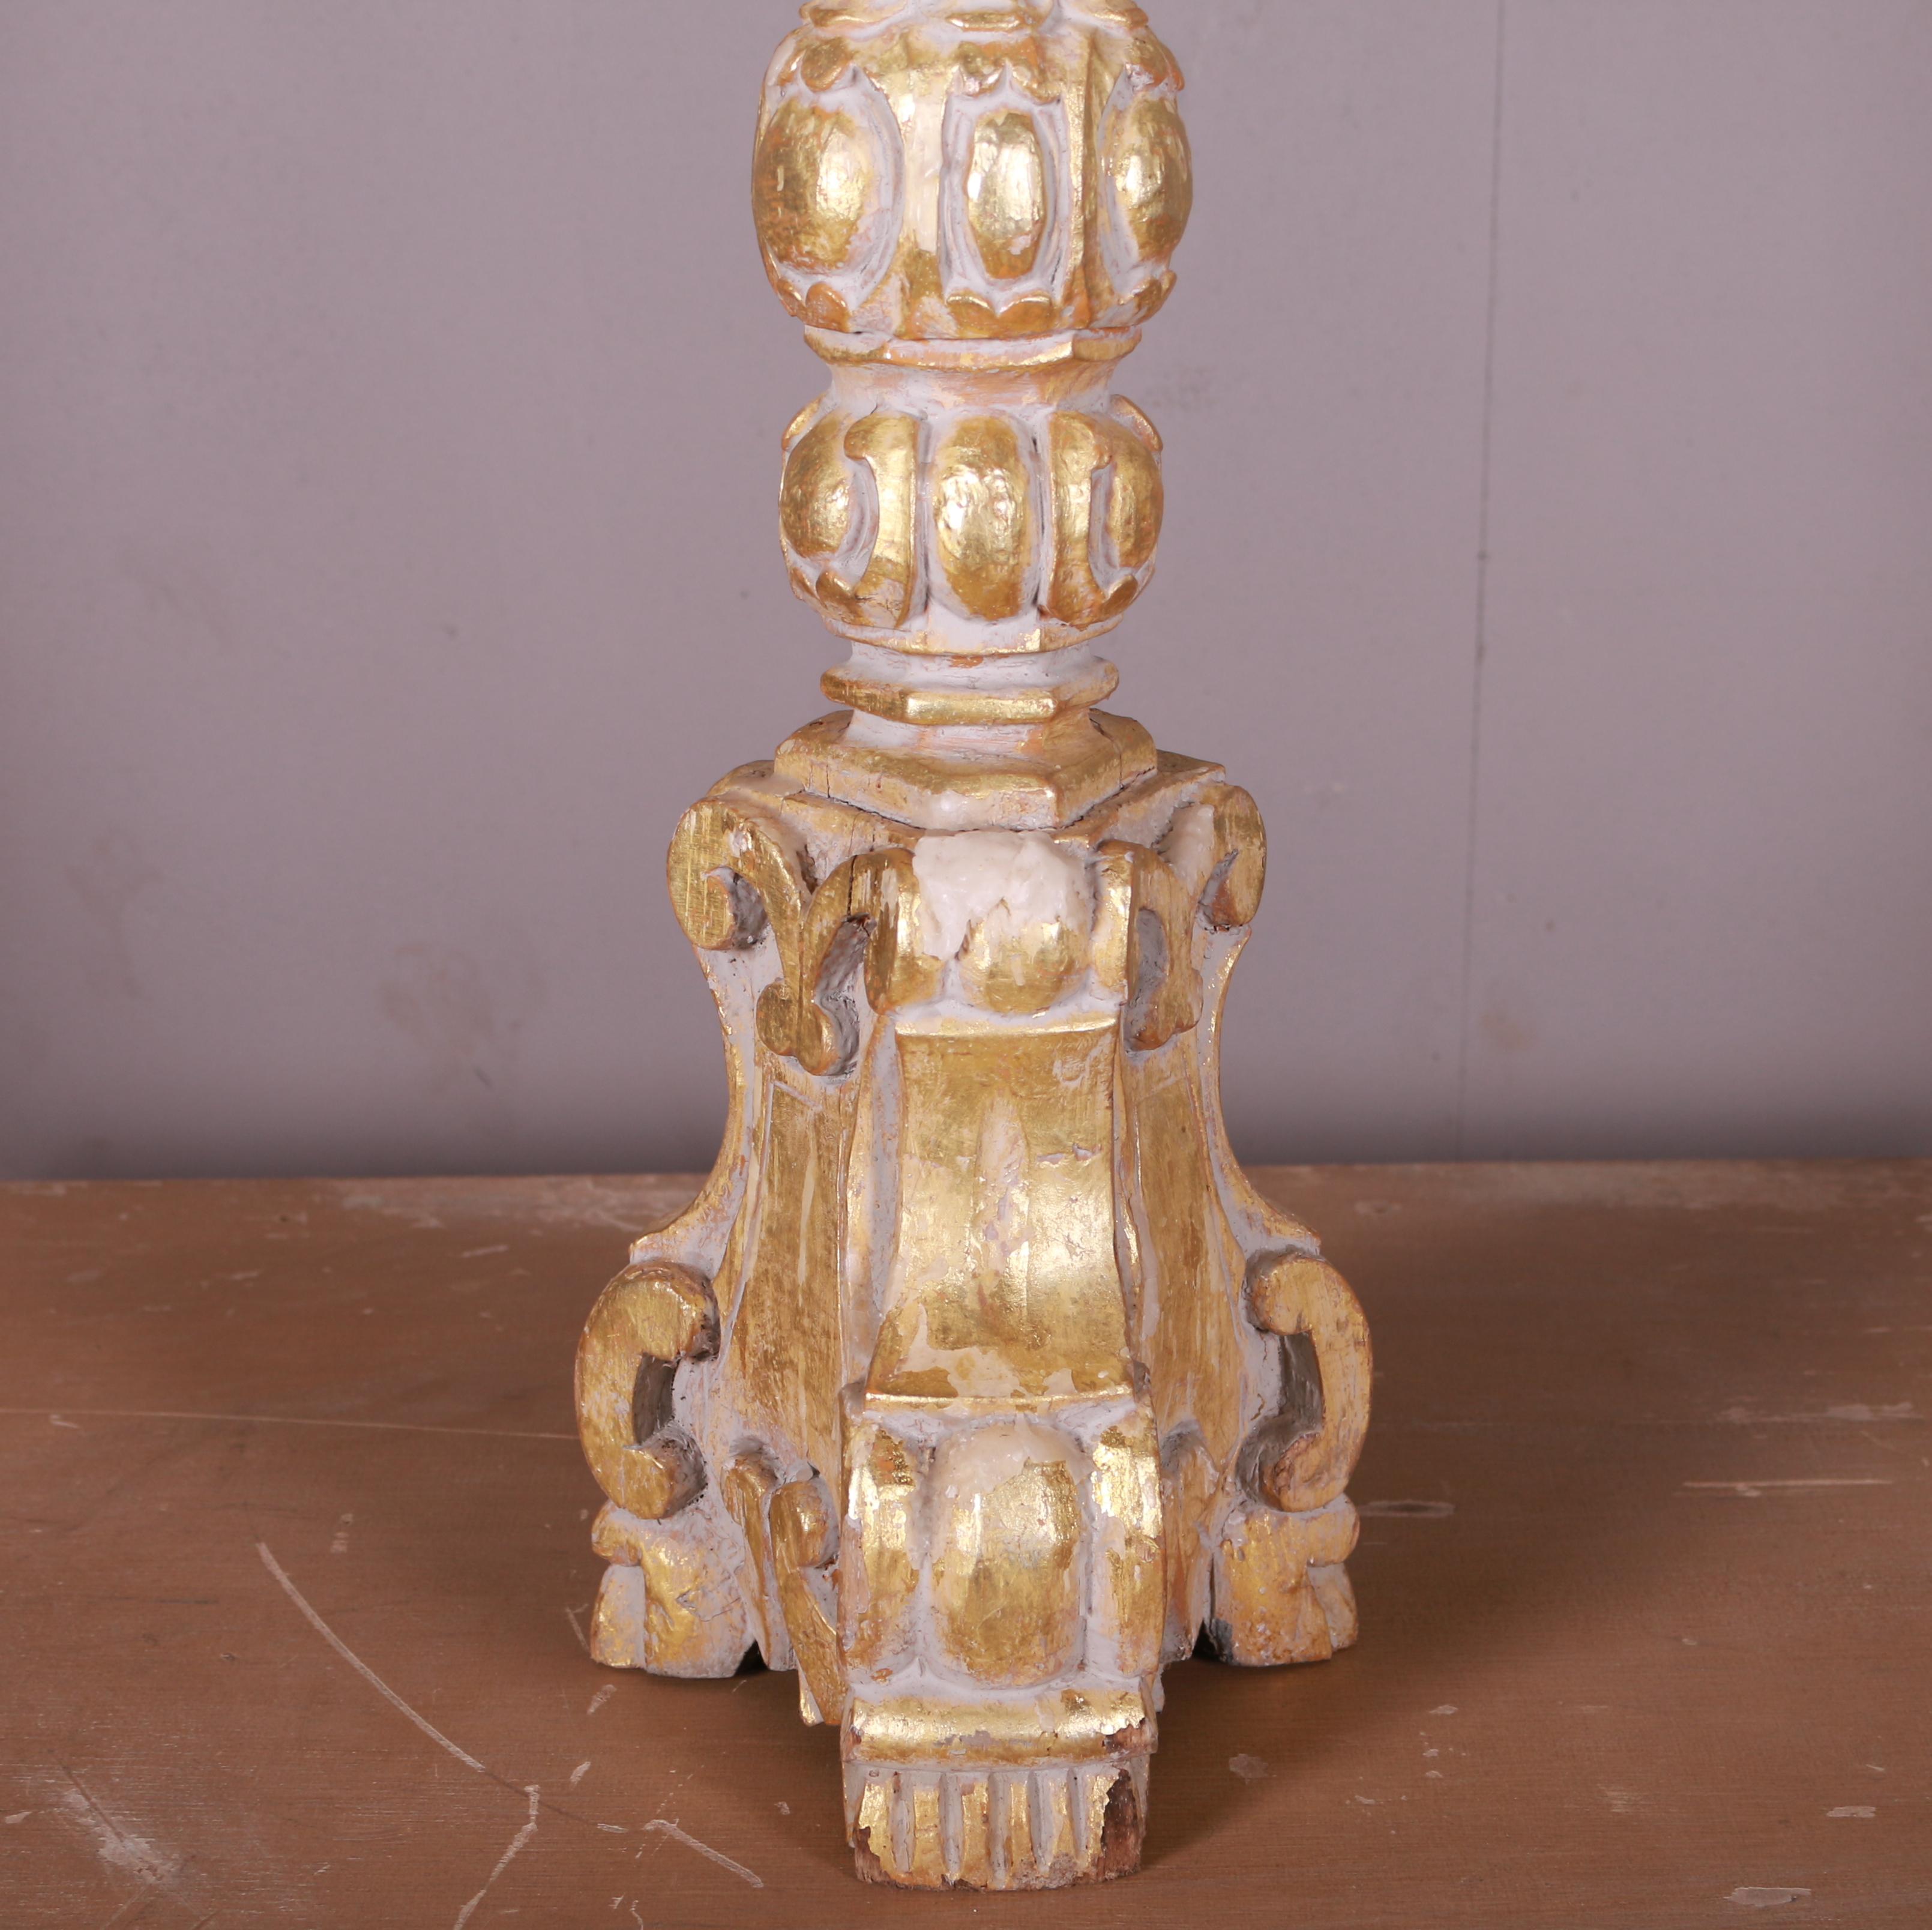 Late 19th C Italian giltwood candle holder. 1890.

Reference: 7380

Dimensions
28.5 inches (72 cms) High
7 inches (18 cms) Diameter.